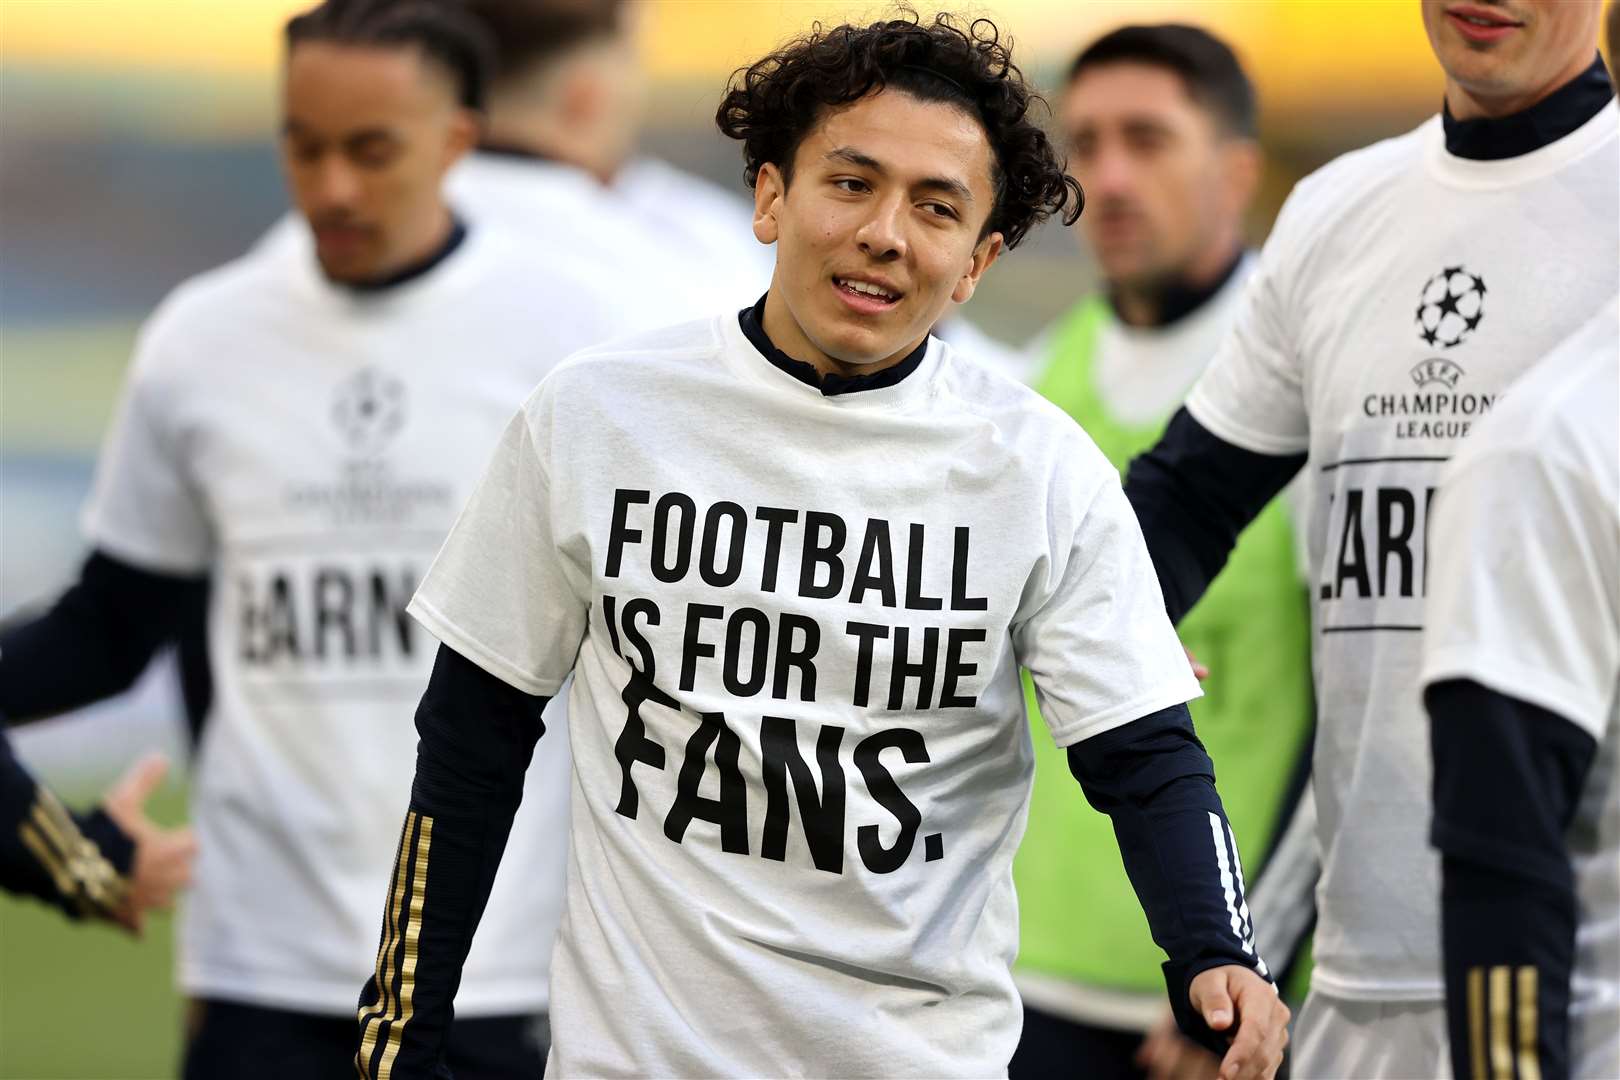 Leeds United player Ian Poveda wore a ‘Football Is For The Fans’ shirt as he warmed up before Monday’s match against Liverpool (Clive Brunskill/PA)